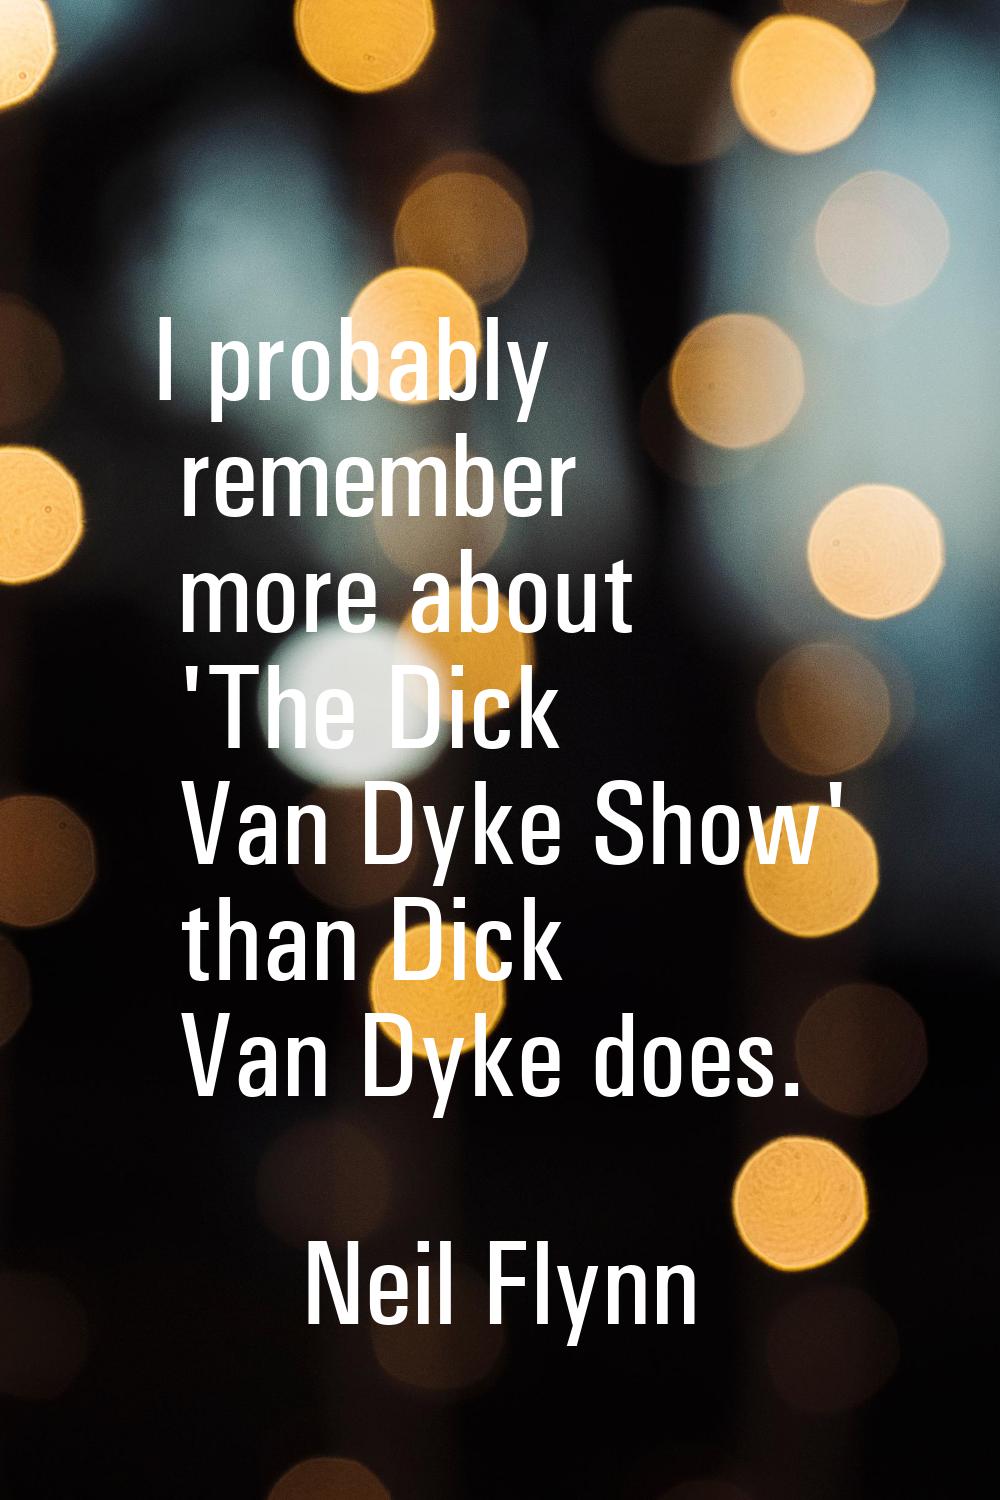 I probably remember more about 'The Dick Van Dyke Show' than Dick Van Dyke does.